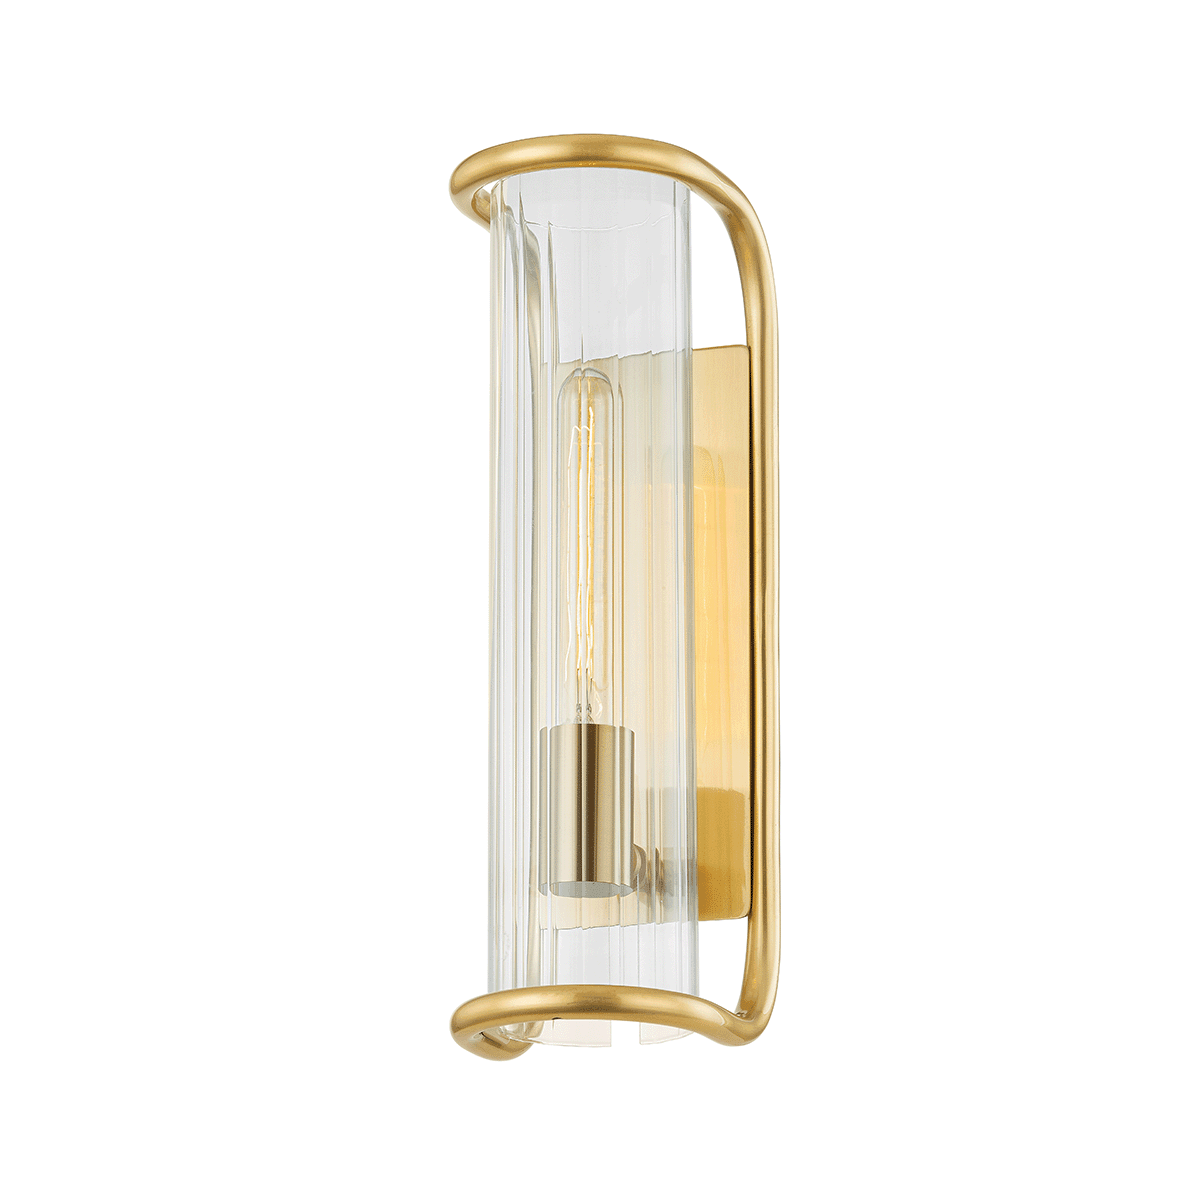 Hudson Valley Lighting - Fillmore Wall Sconce - 8917-AGB | Montreal Lighting & Hardware